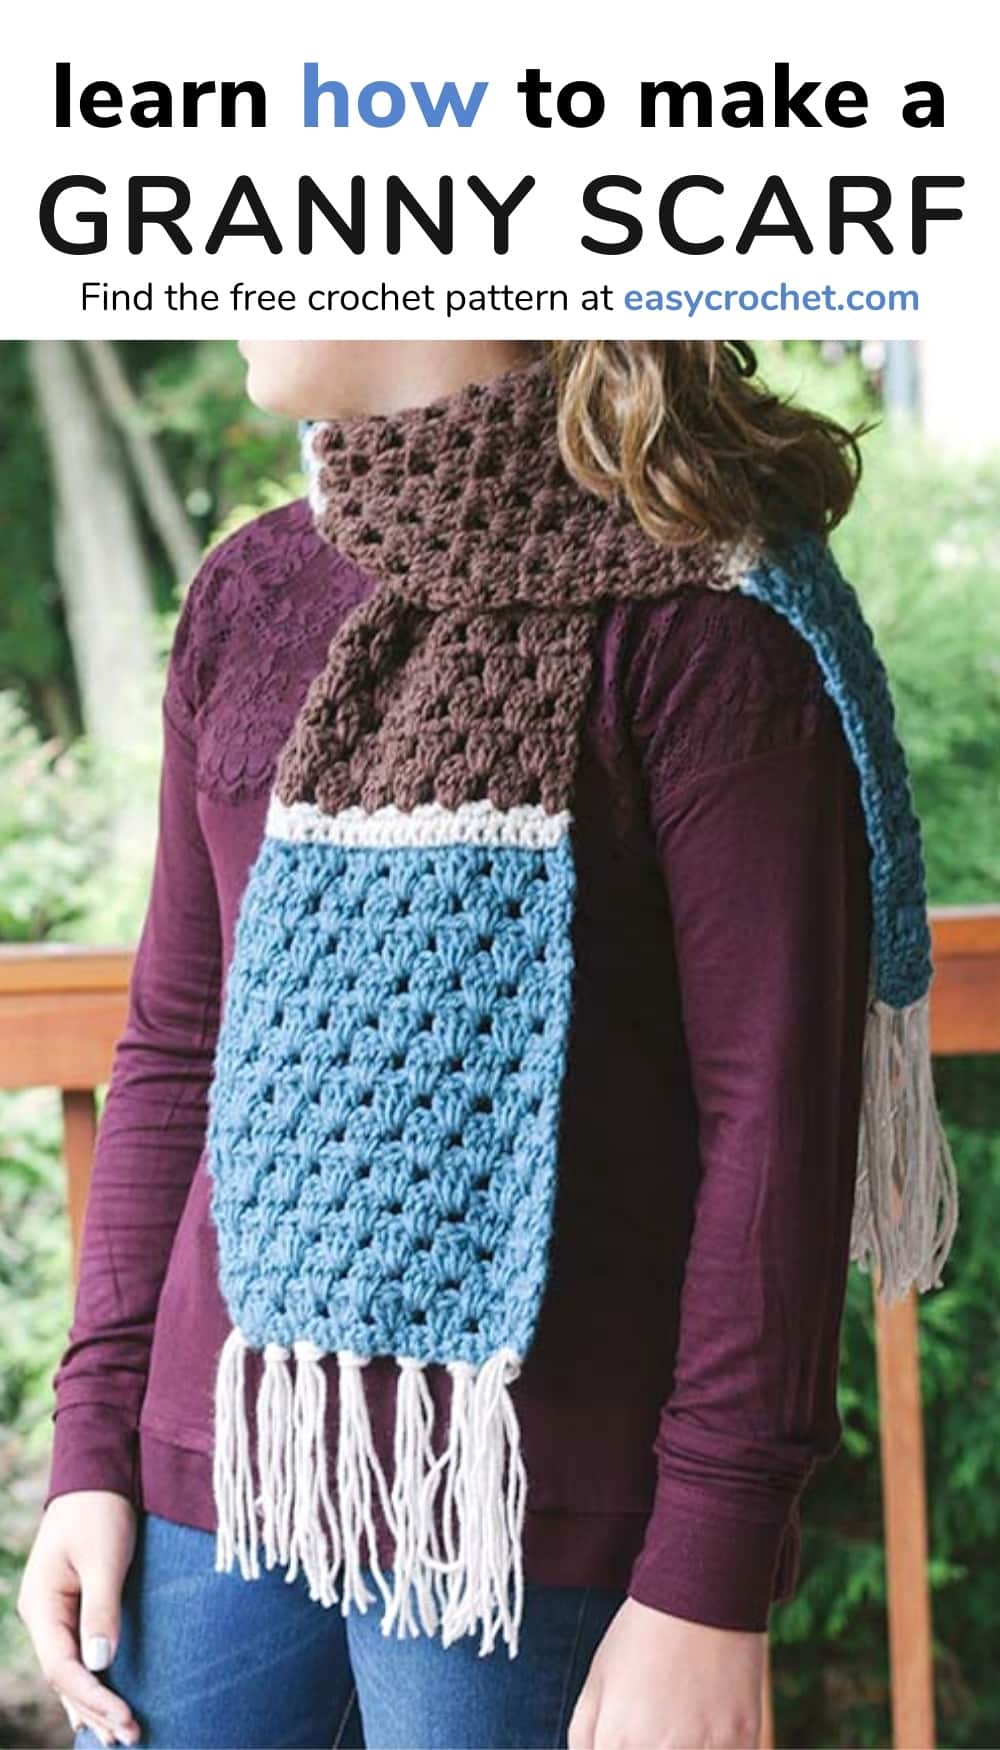 Lean how to crochet a granny scarf with our free crochet pattern. Find it at easycrochet.com